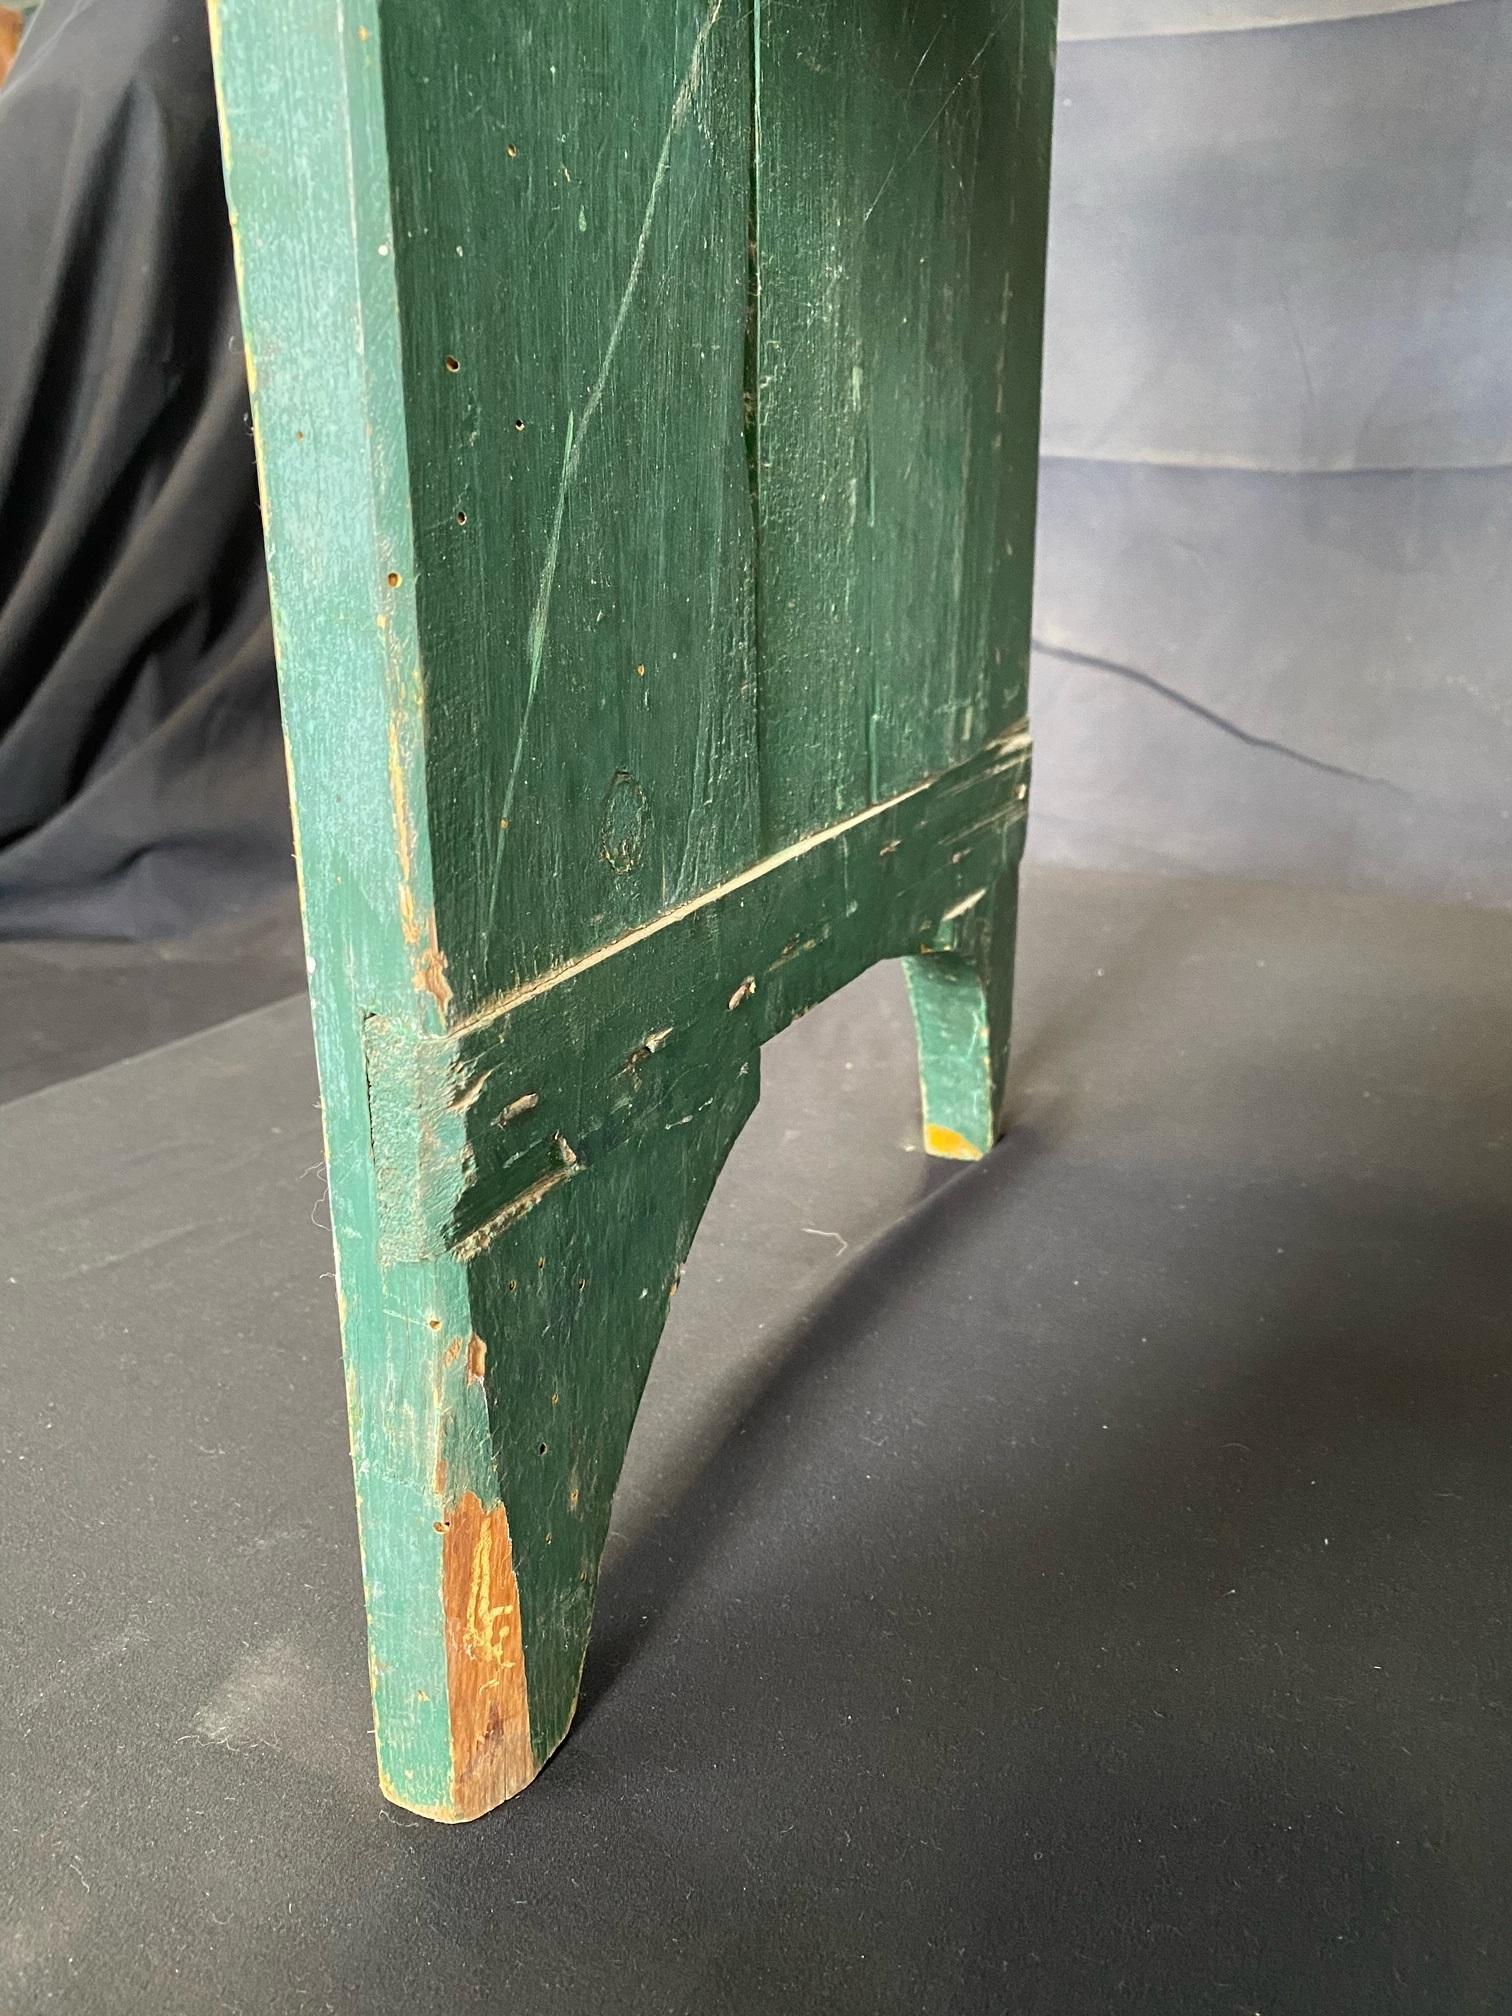 Rustic 19th Century Painted Tall French Waterfall Garden Pot Shelves or Stairs For Sale 3